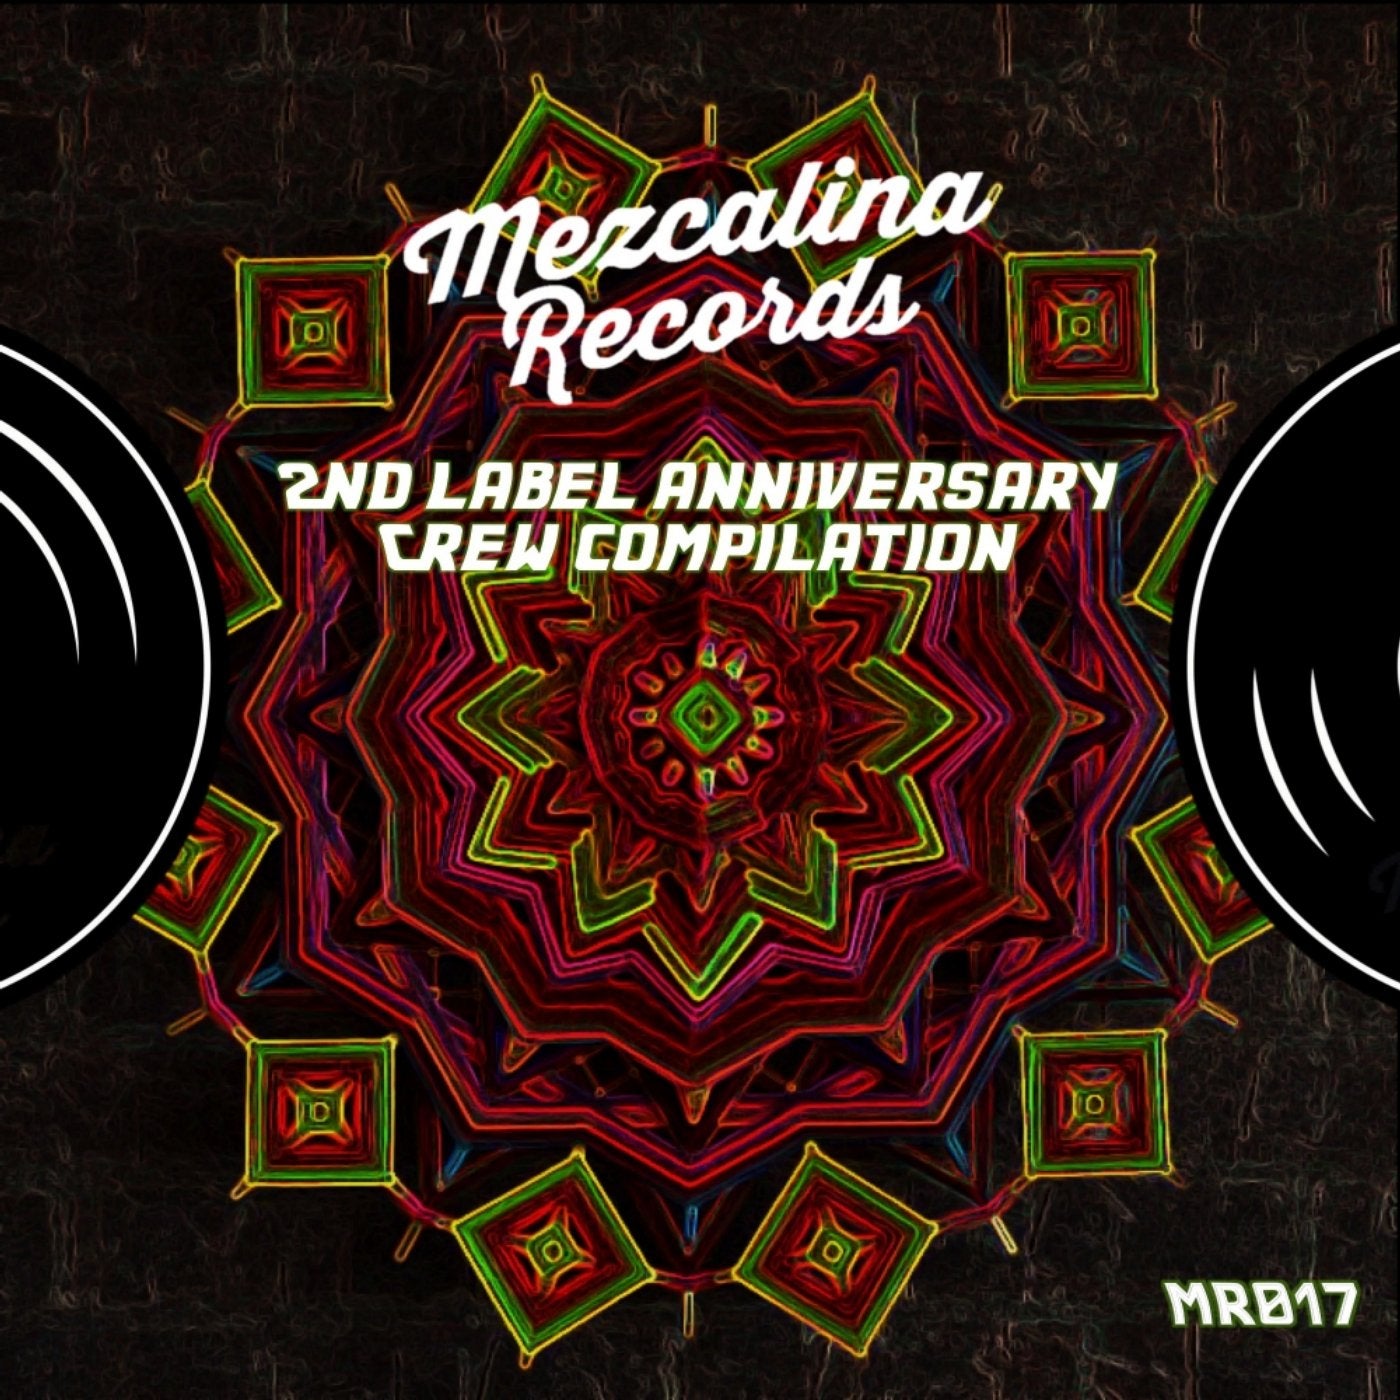 2nd Label Anniversary Compilation